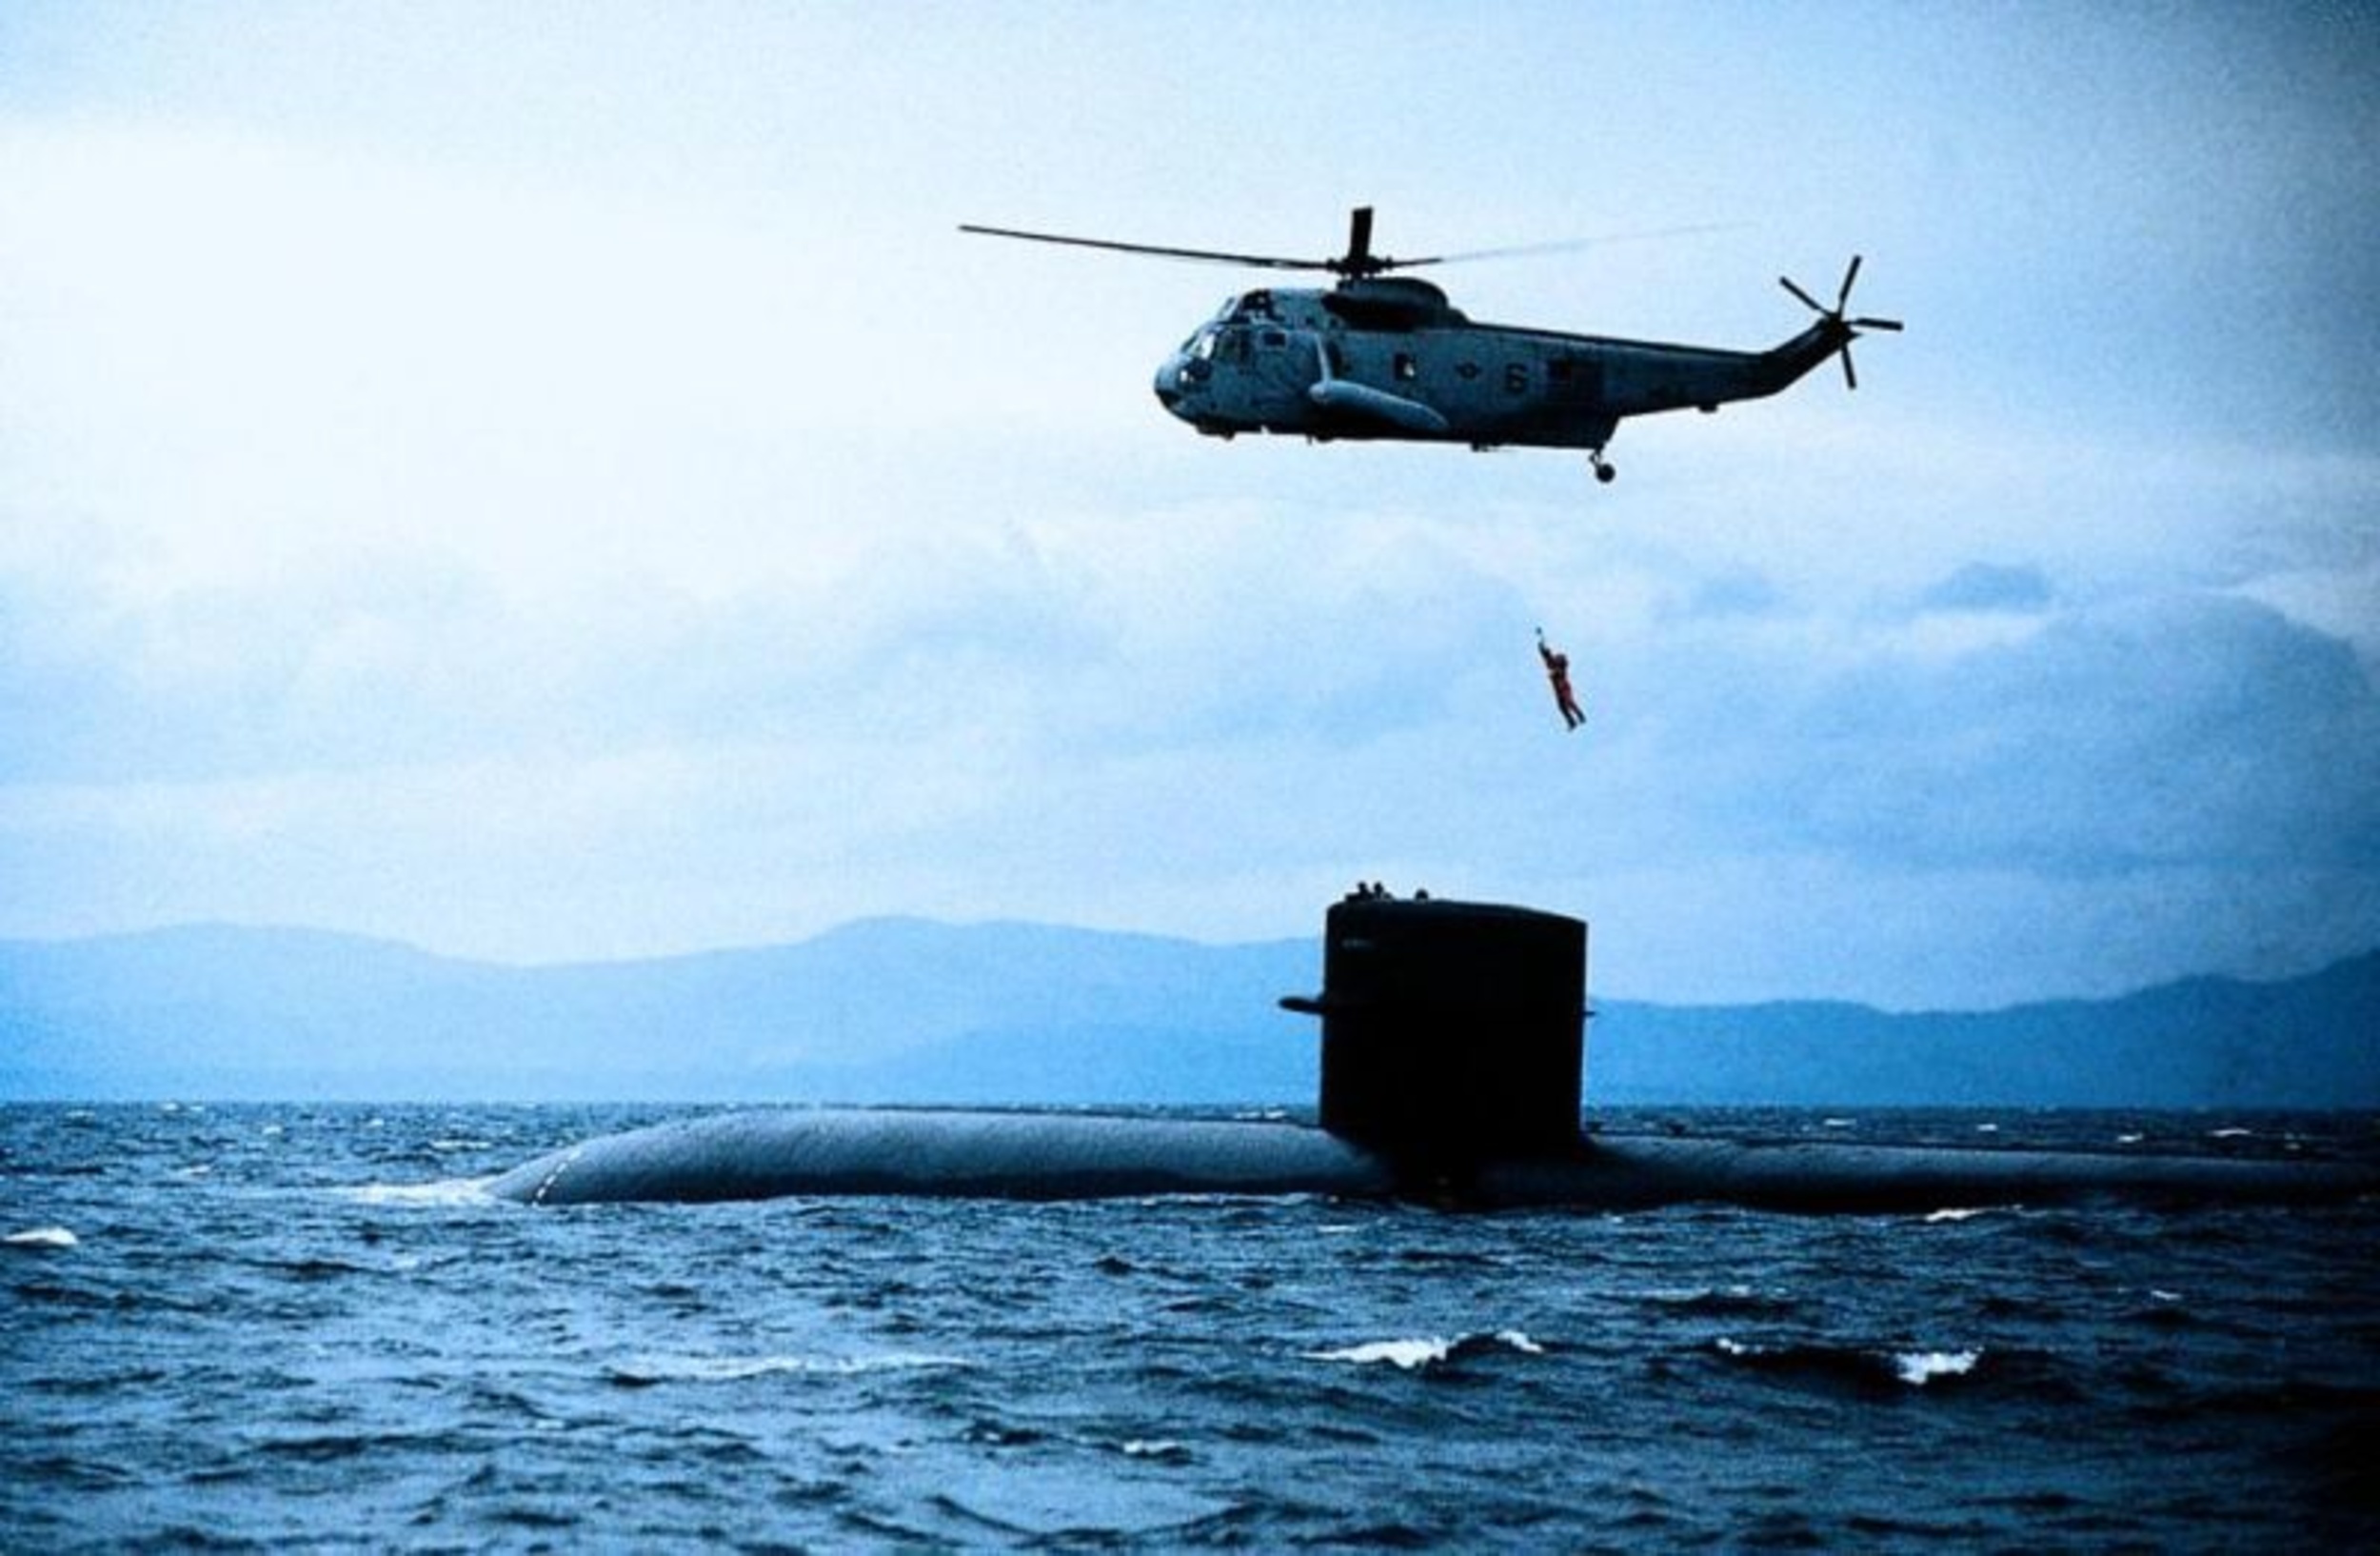 <p>The movie was mostly shot on sound stages on the Paramount lot since you can’t shoot a real movie on a submarine. That doesn’t mean actual subs weren’t involved. The USS Houston and its crew spent a month working on the film. They surfaced more than 40 times during shooting, either in rehearsals or for the camera.</p><p><a href='https://www.msn.com/en-us/community/channel/vid-cj9pqbr0vn9in2b6ddcd8sfgpfq6x6utp44fssrv6mc2gtybw0us'>Follow us on MSN to see more of our exclusive entertainment content.</a></p>